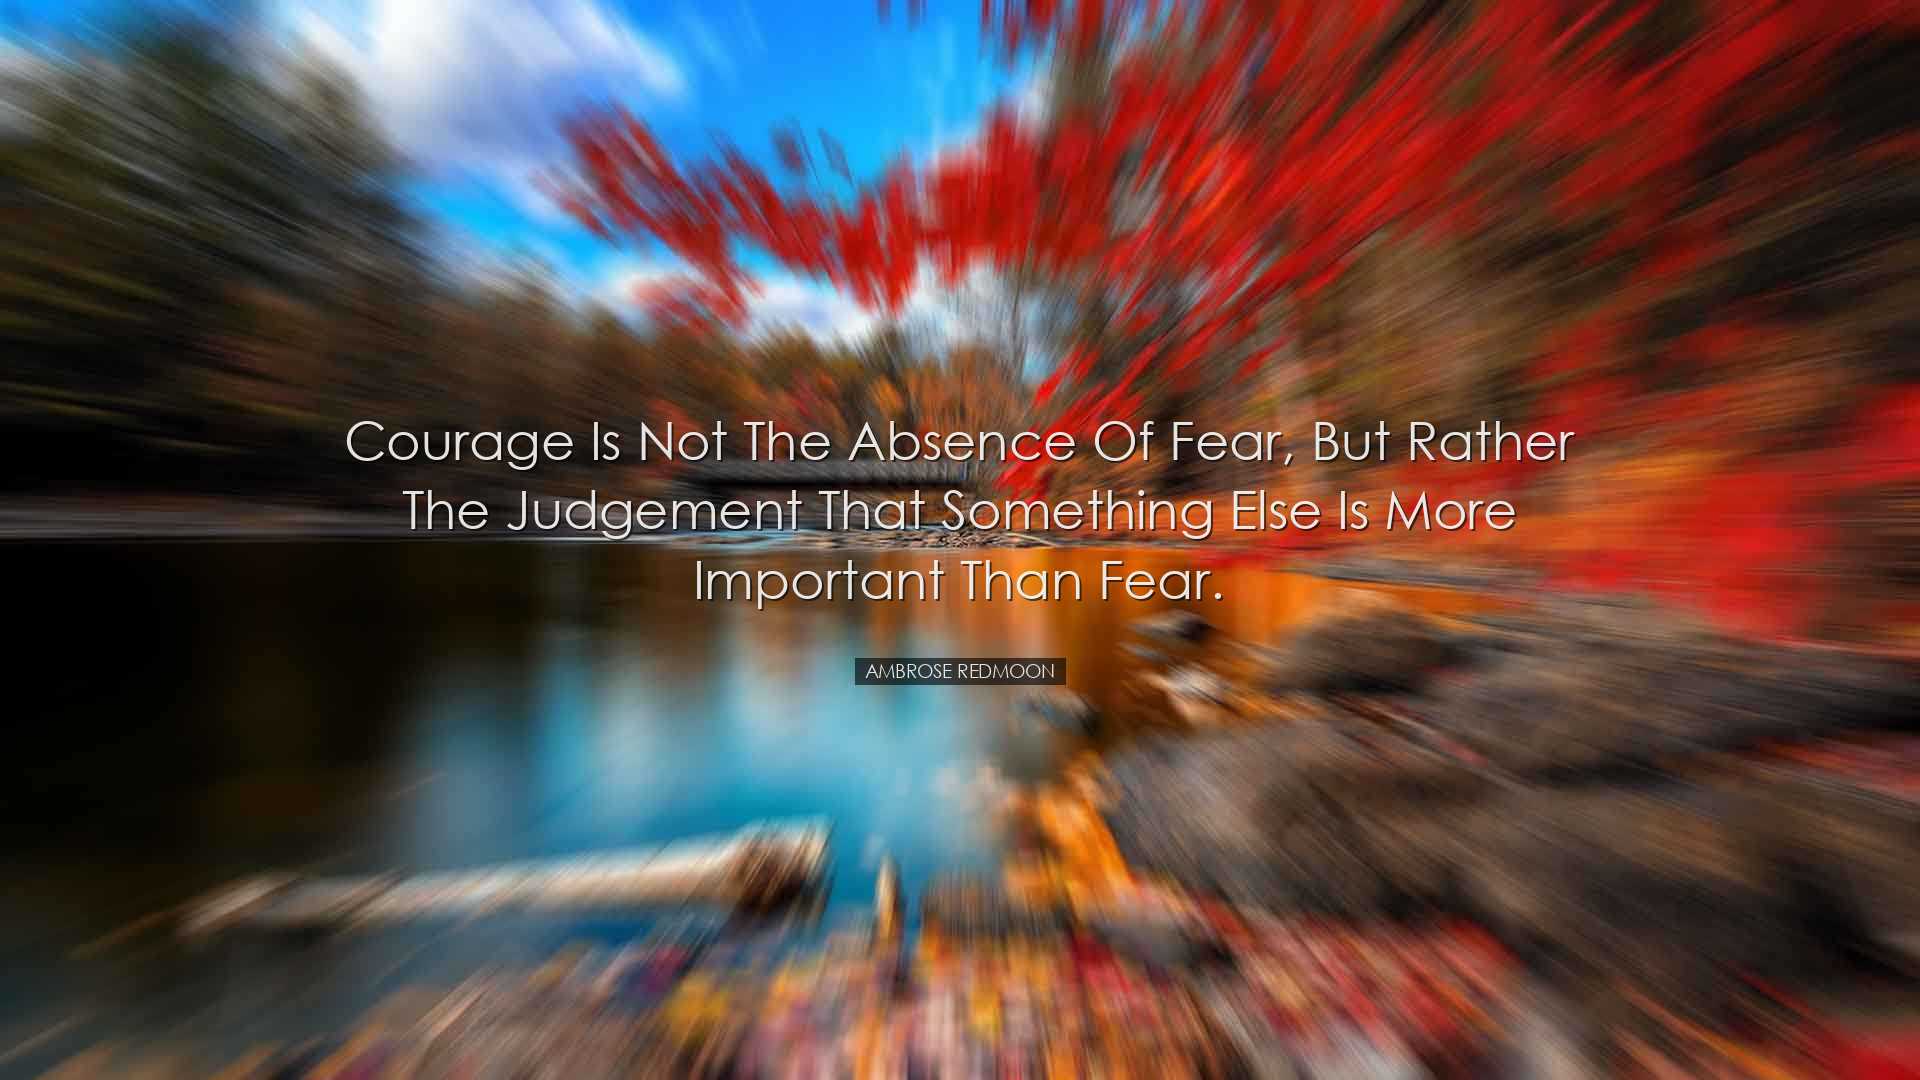 Courage is not the absence of fear, but rather the judgement that